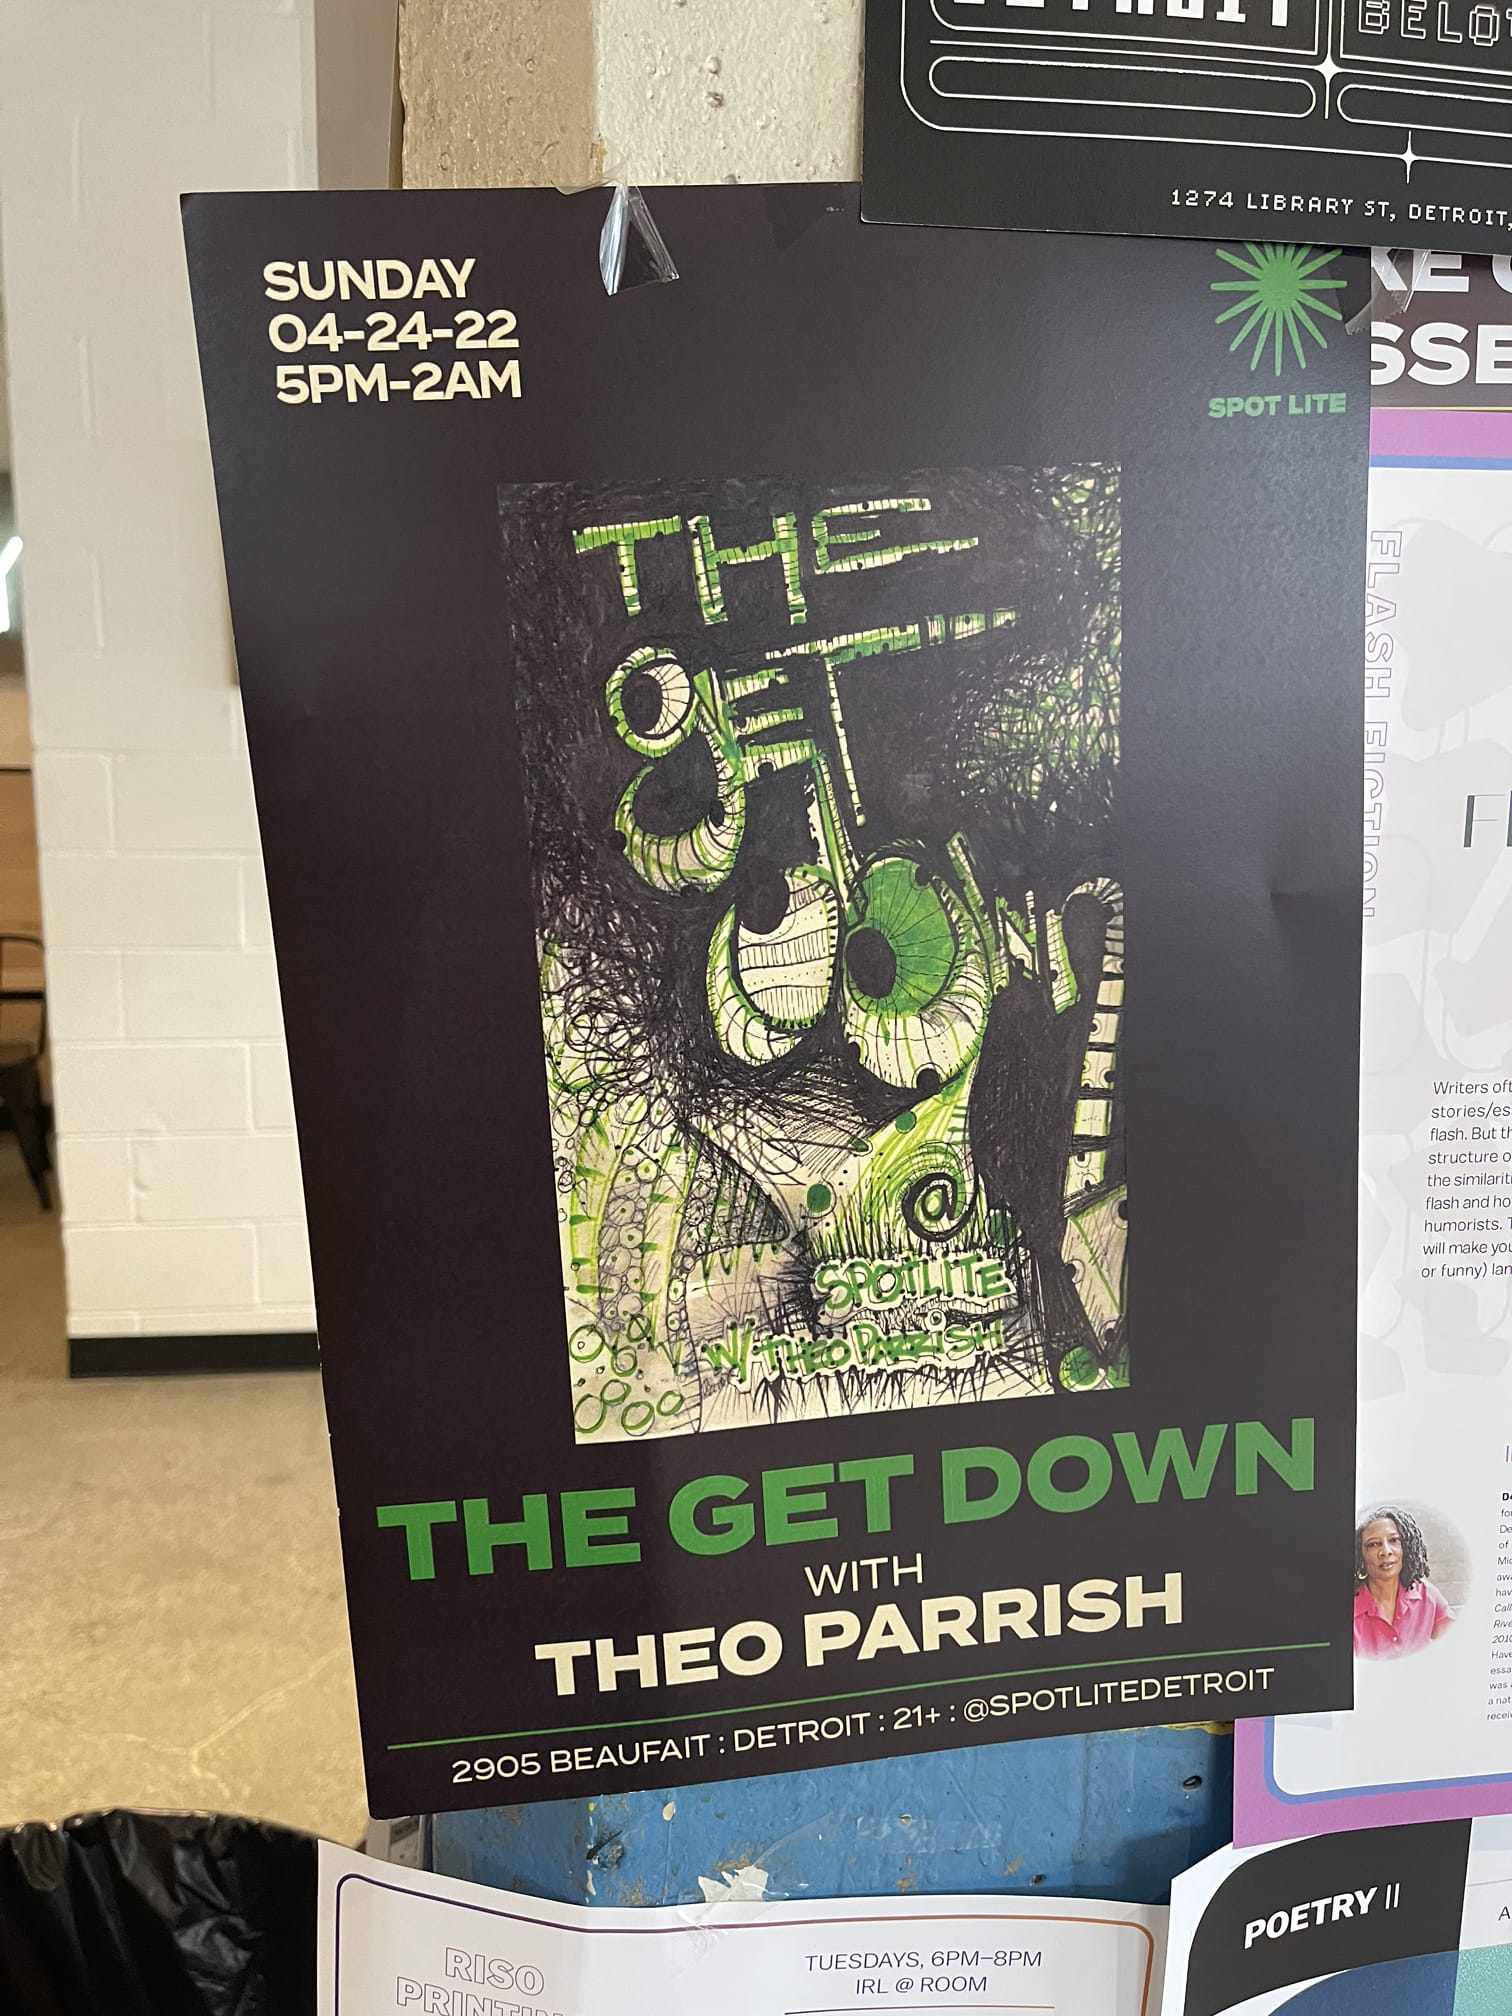 Ad for theo parrish show at spotlite